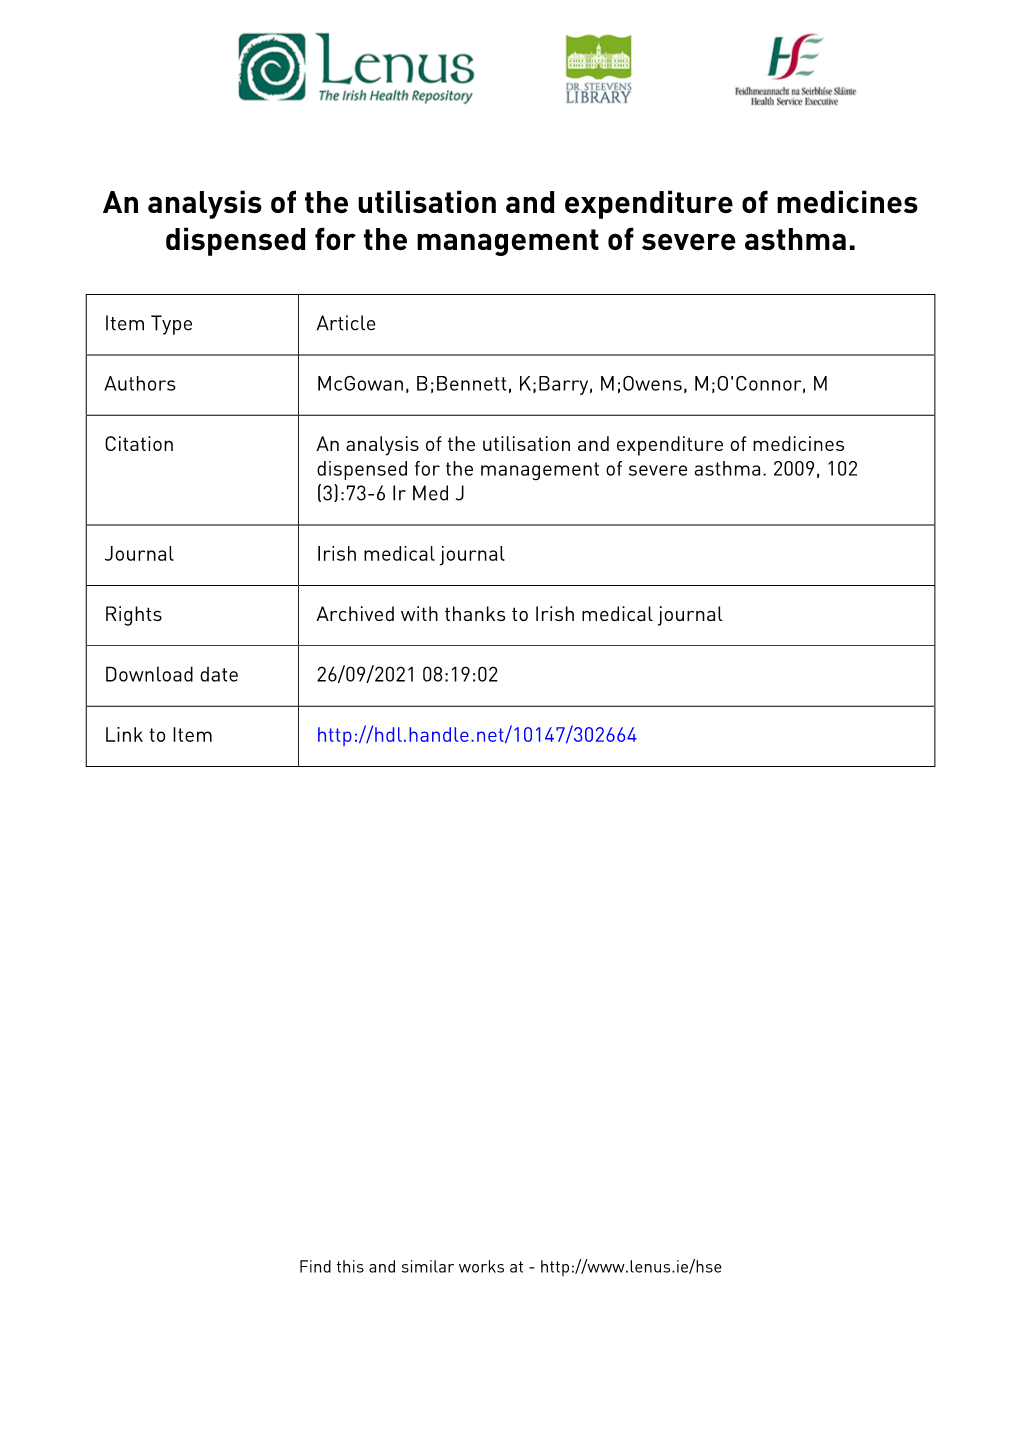 An Analysis of the Utilisation and Expenditure of Medicines Dispensed for the Management of Severe Asthma